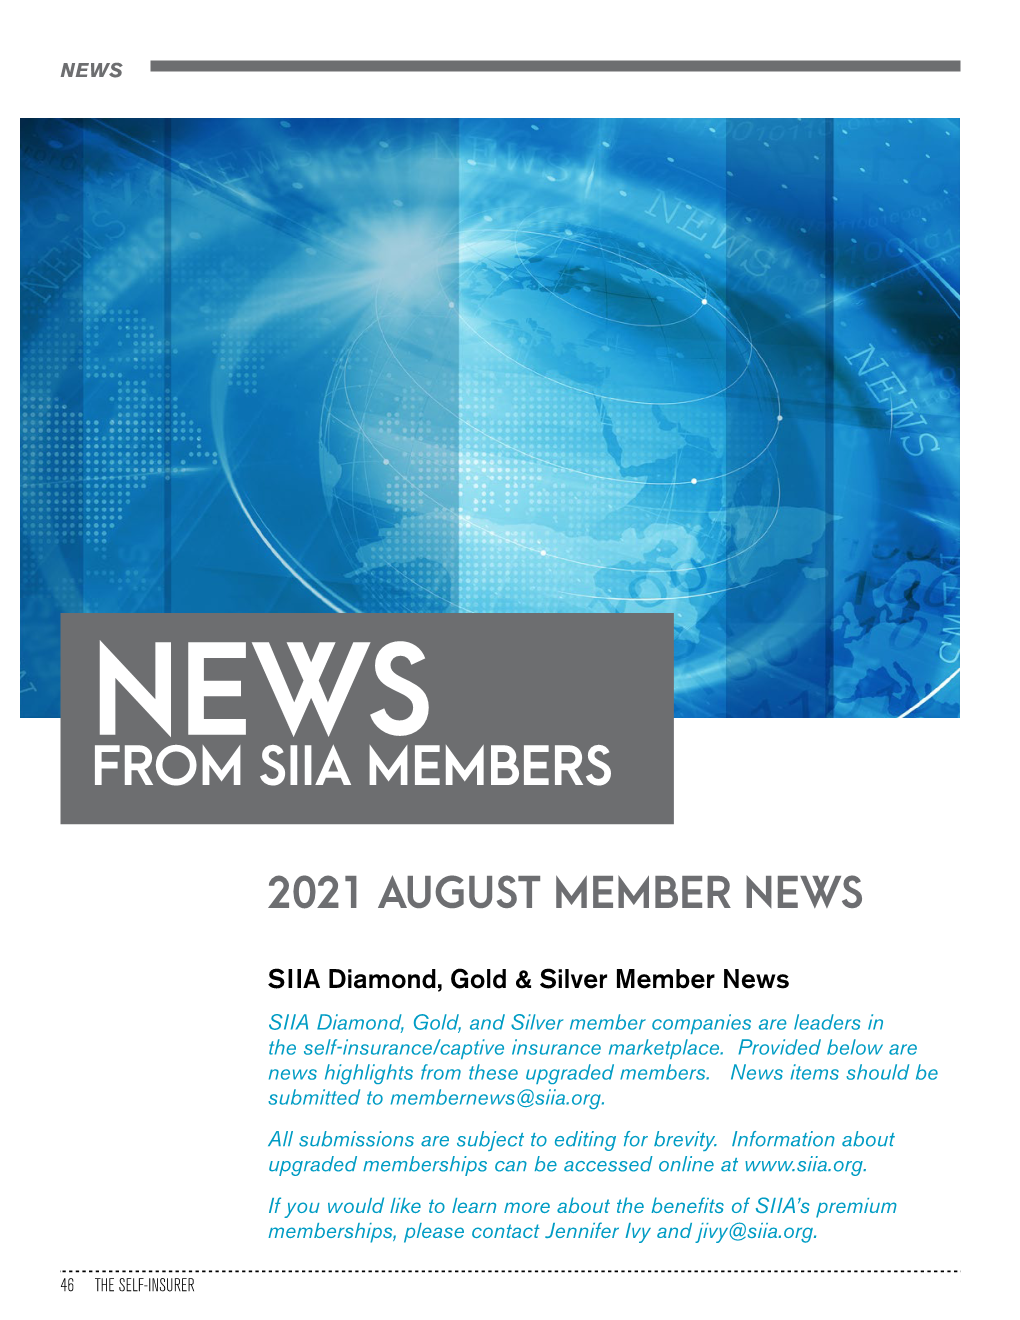 News from Siia Members